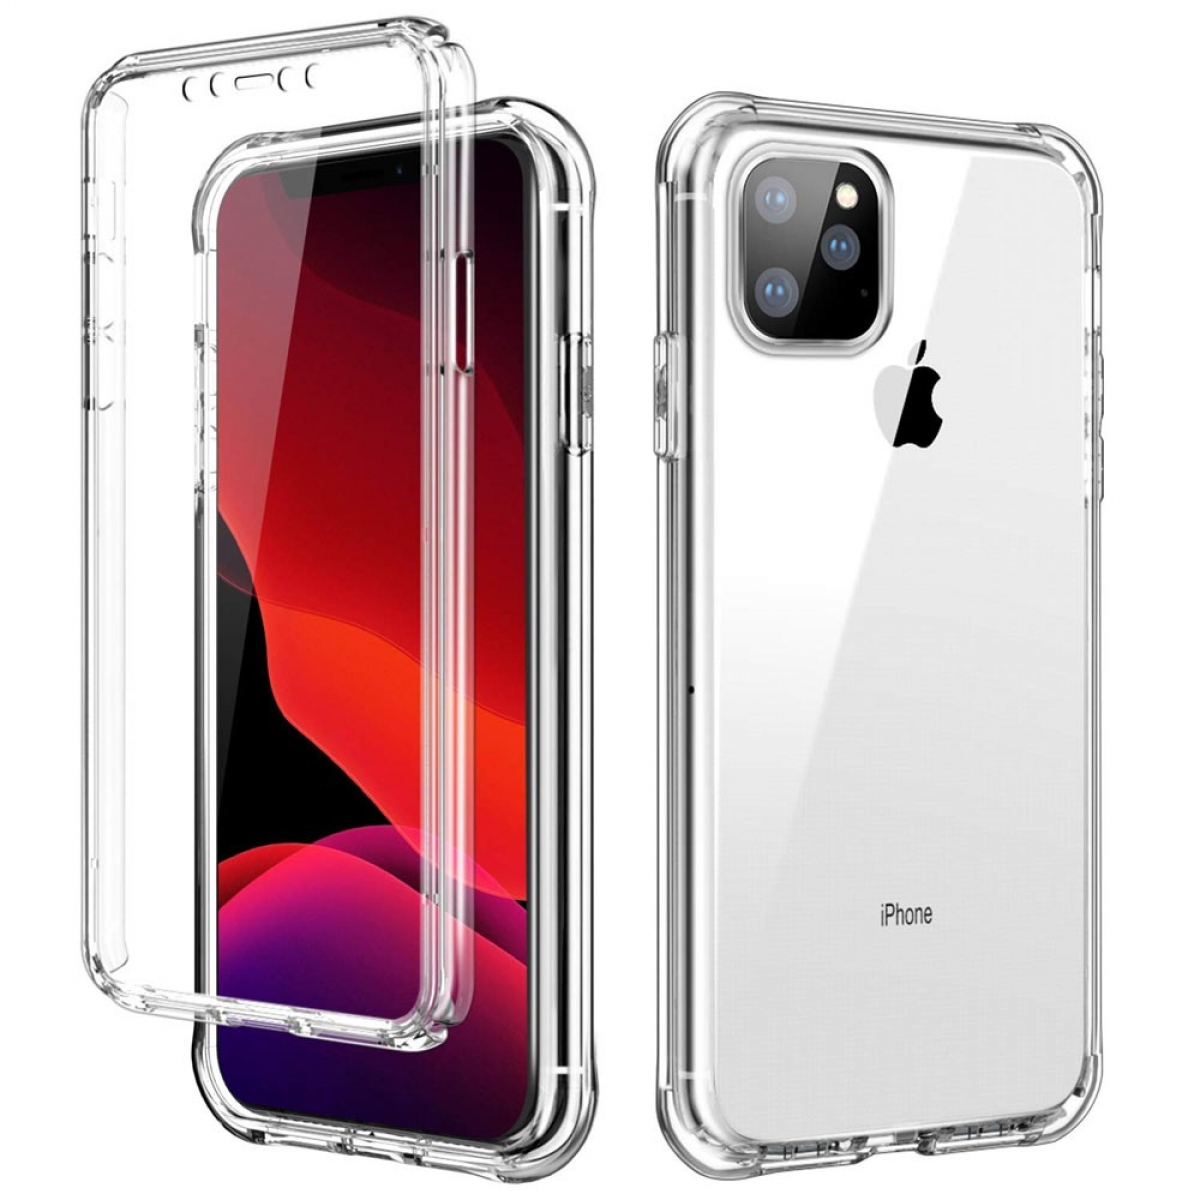 Pro Apple, Transparent 360° TPU+PC, 12 CASEONLINE Max, iPhone Backcover,